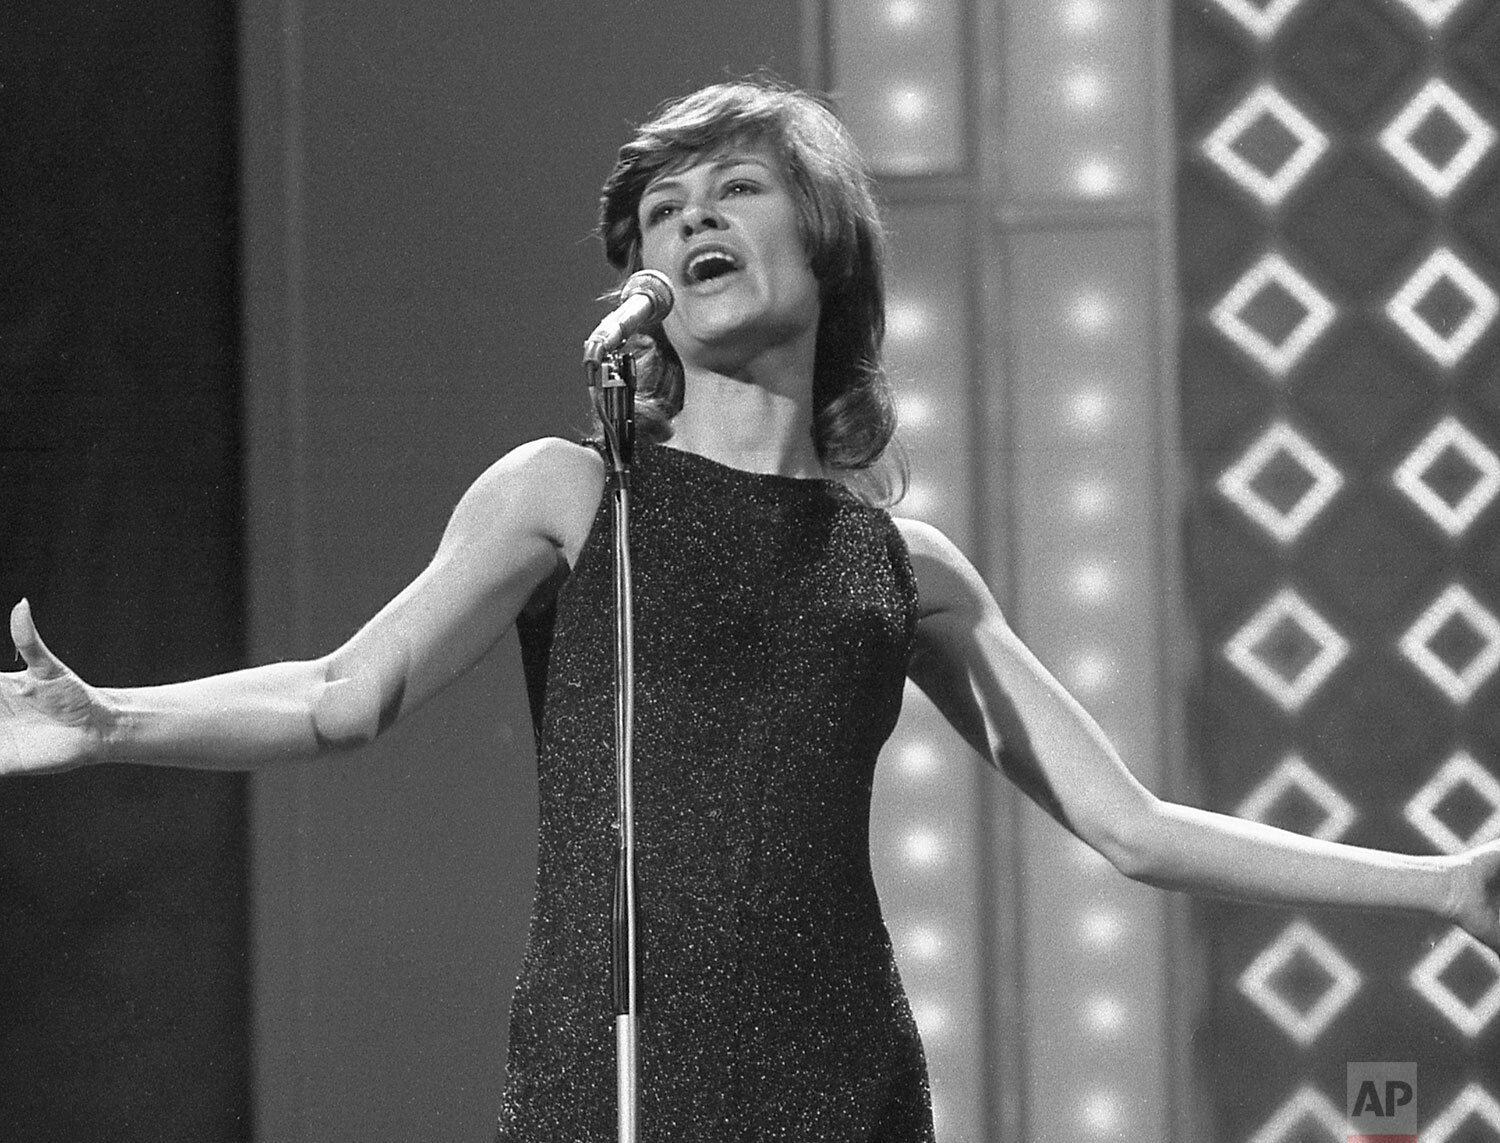  West German singer Mary Roos, performs her song "Nur die Liebe laesst dich leben" (Only Love Lets You Live) during dress rehearsal at the Usher Hall in Edinburgh, Scotland, March 25, 1972 for tonight's final of the Eurovision Song Contest. (AP Photo